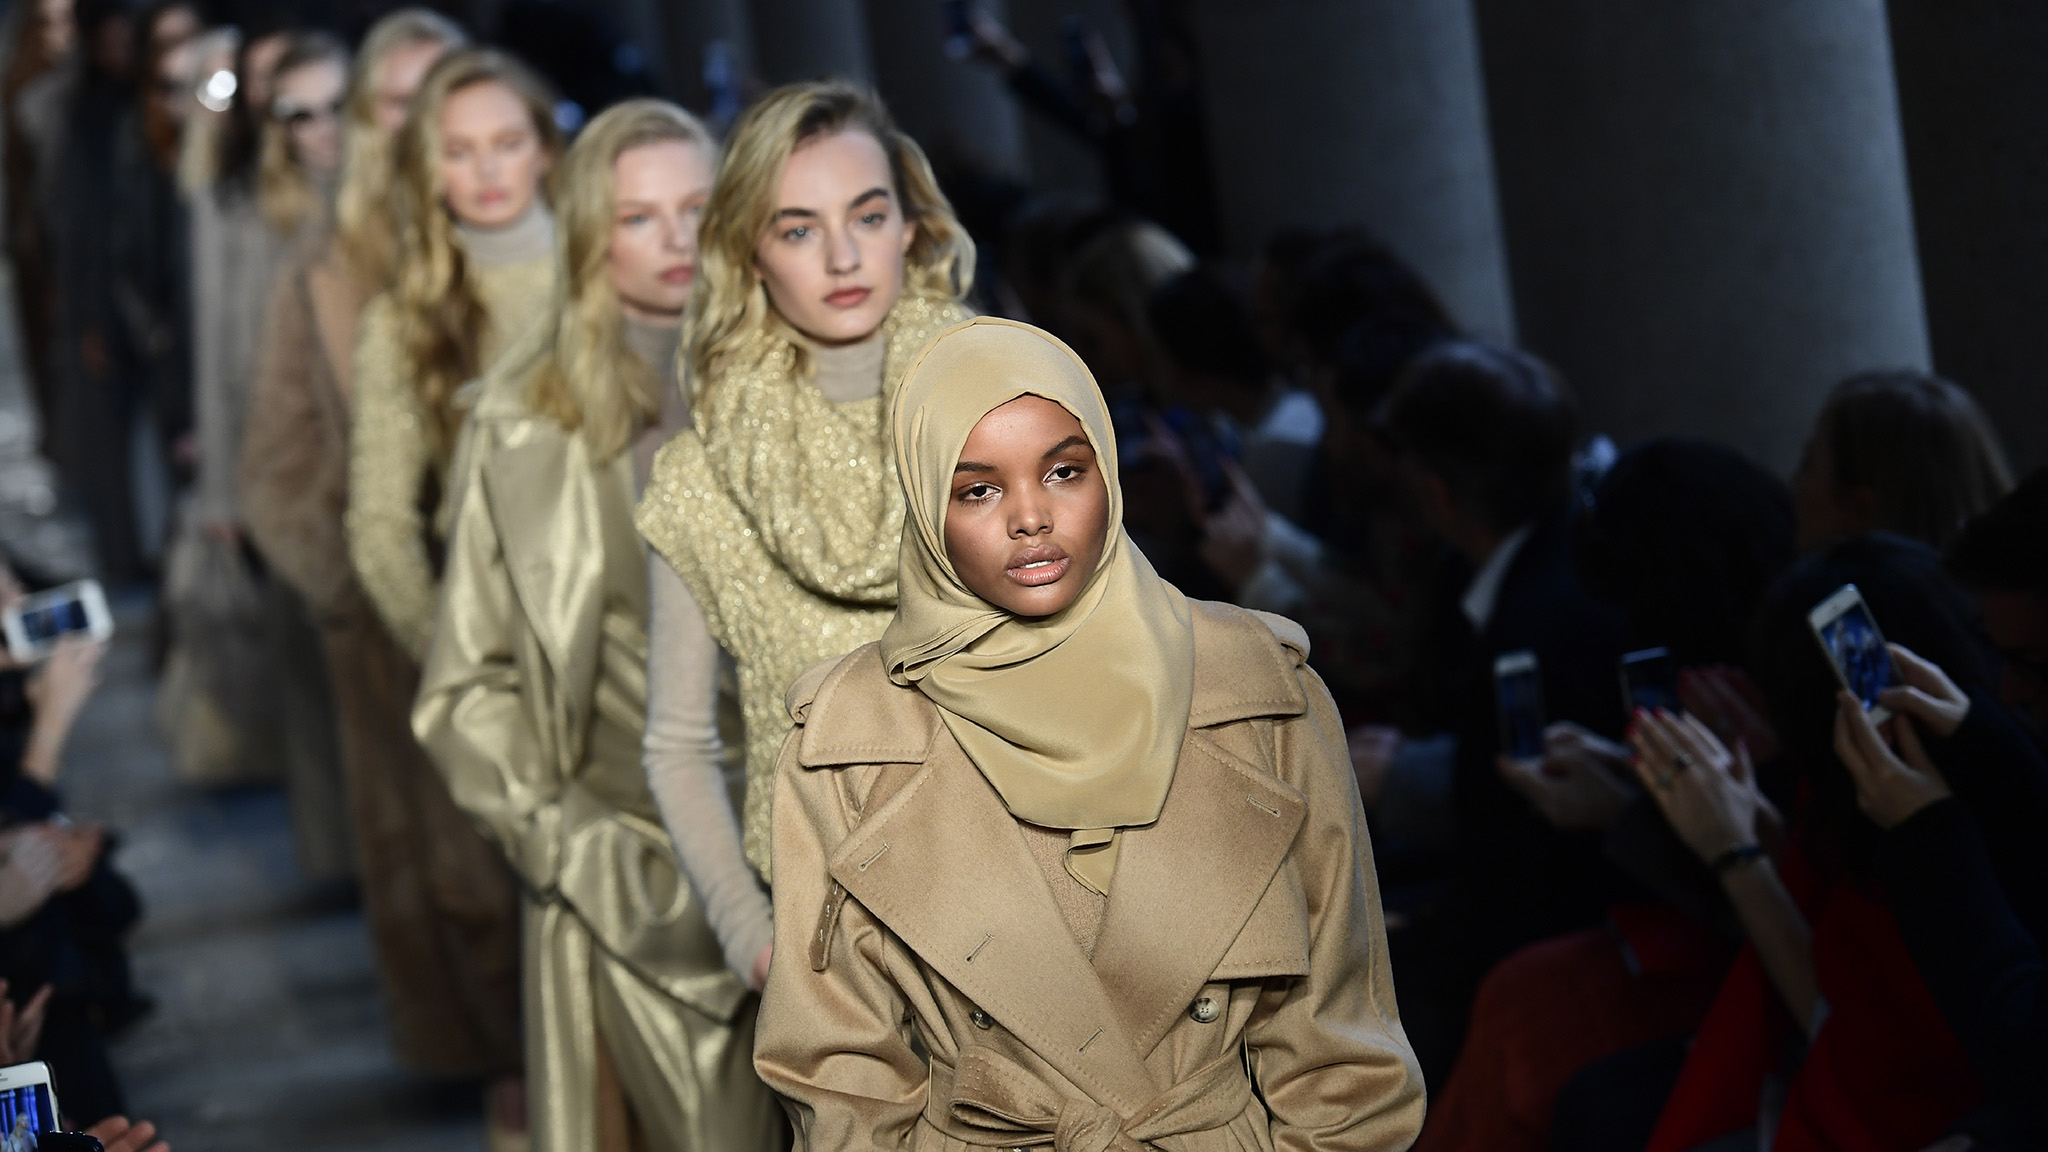 High Fashion And Hijabs Are Good For Business - Halima Aden Max Mara , HD Wallpaper & Backgrounds